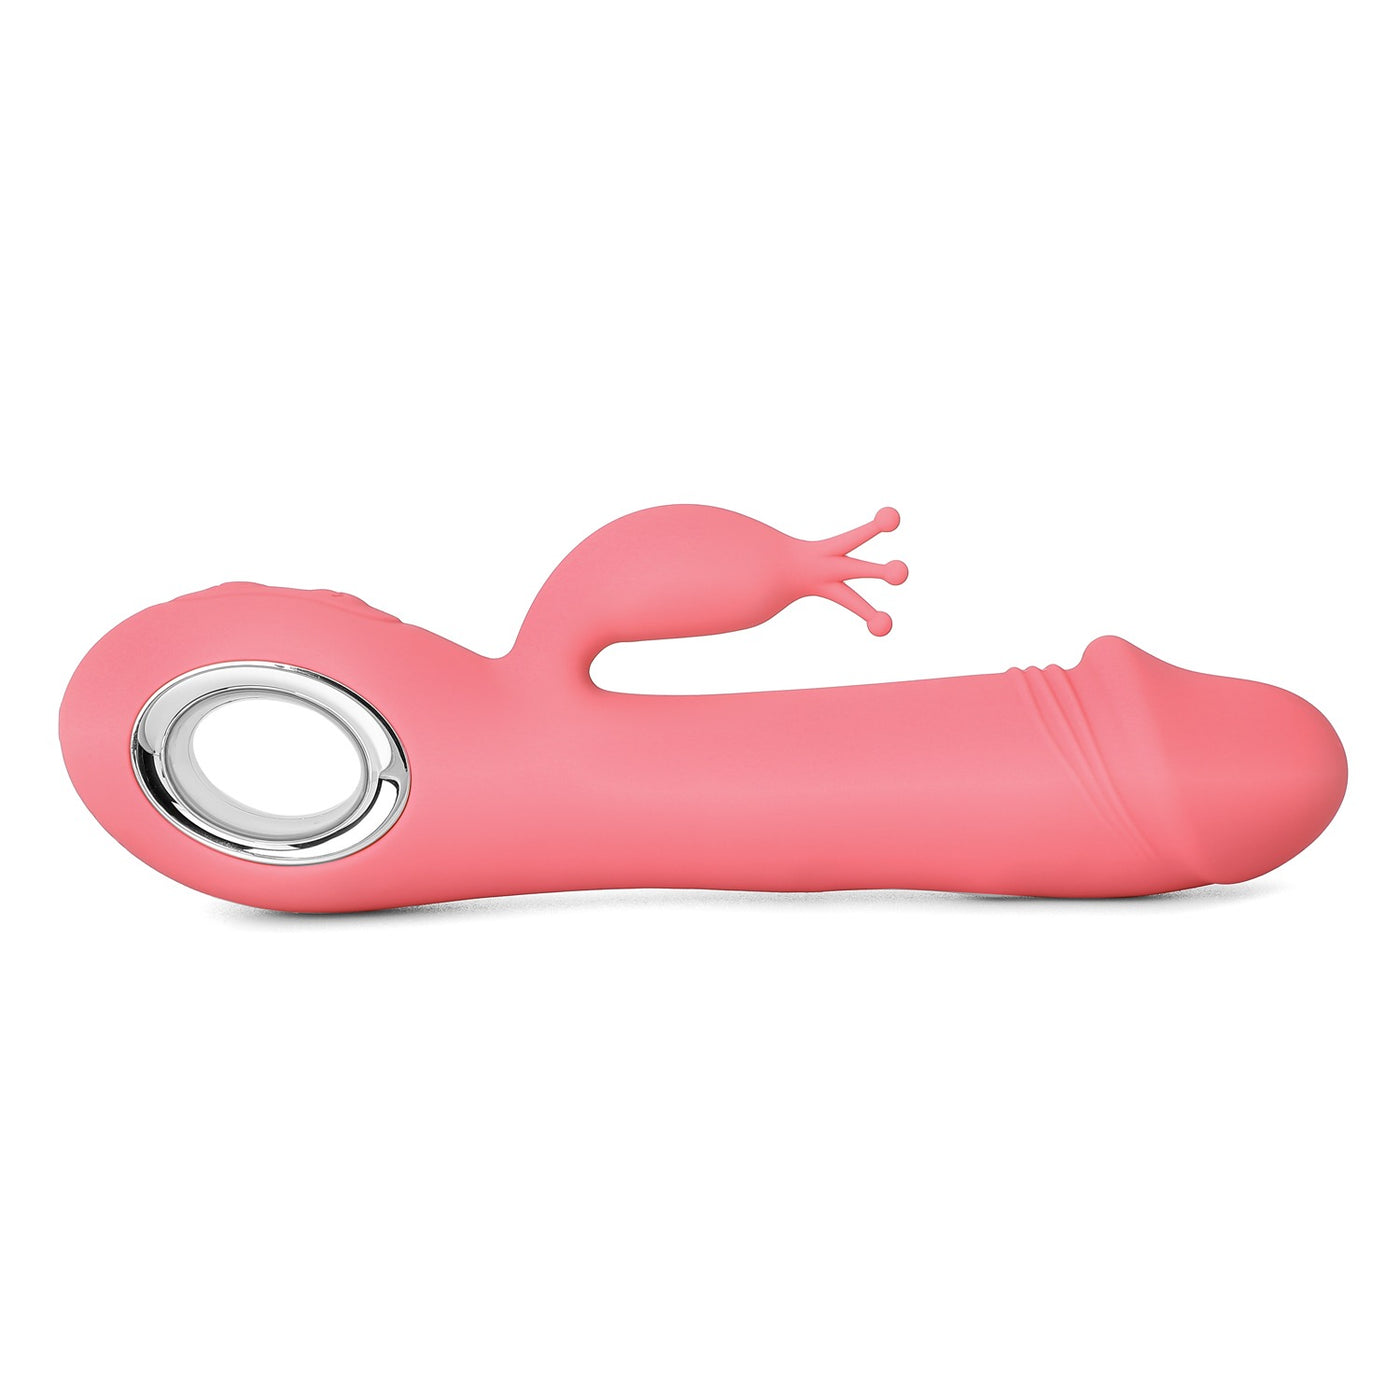 Silicone Penis Shape Vibrator with Rotation and Heating